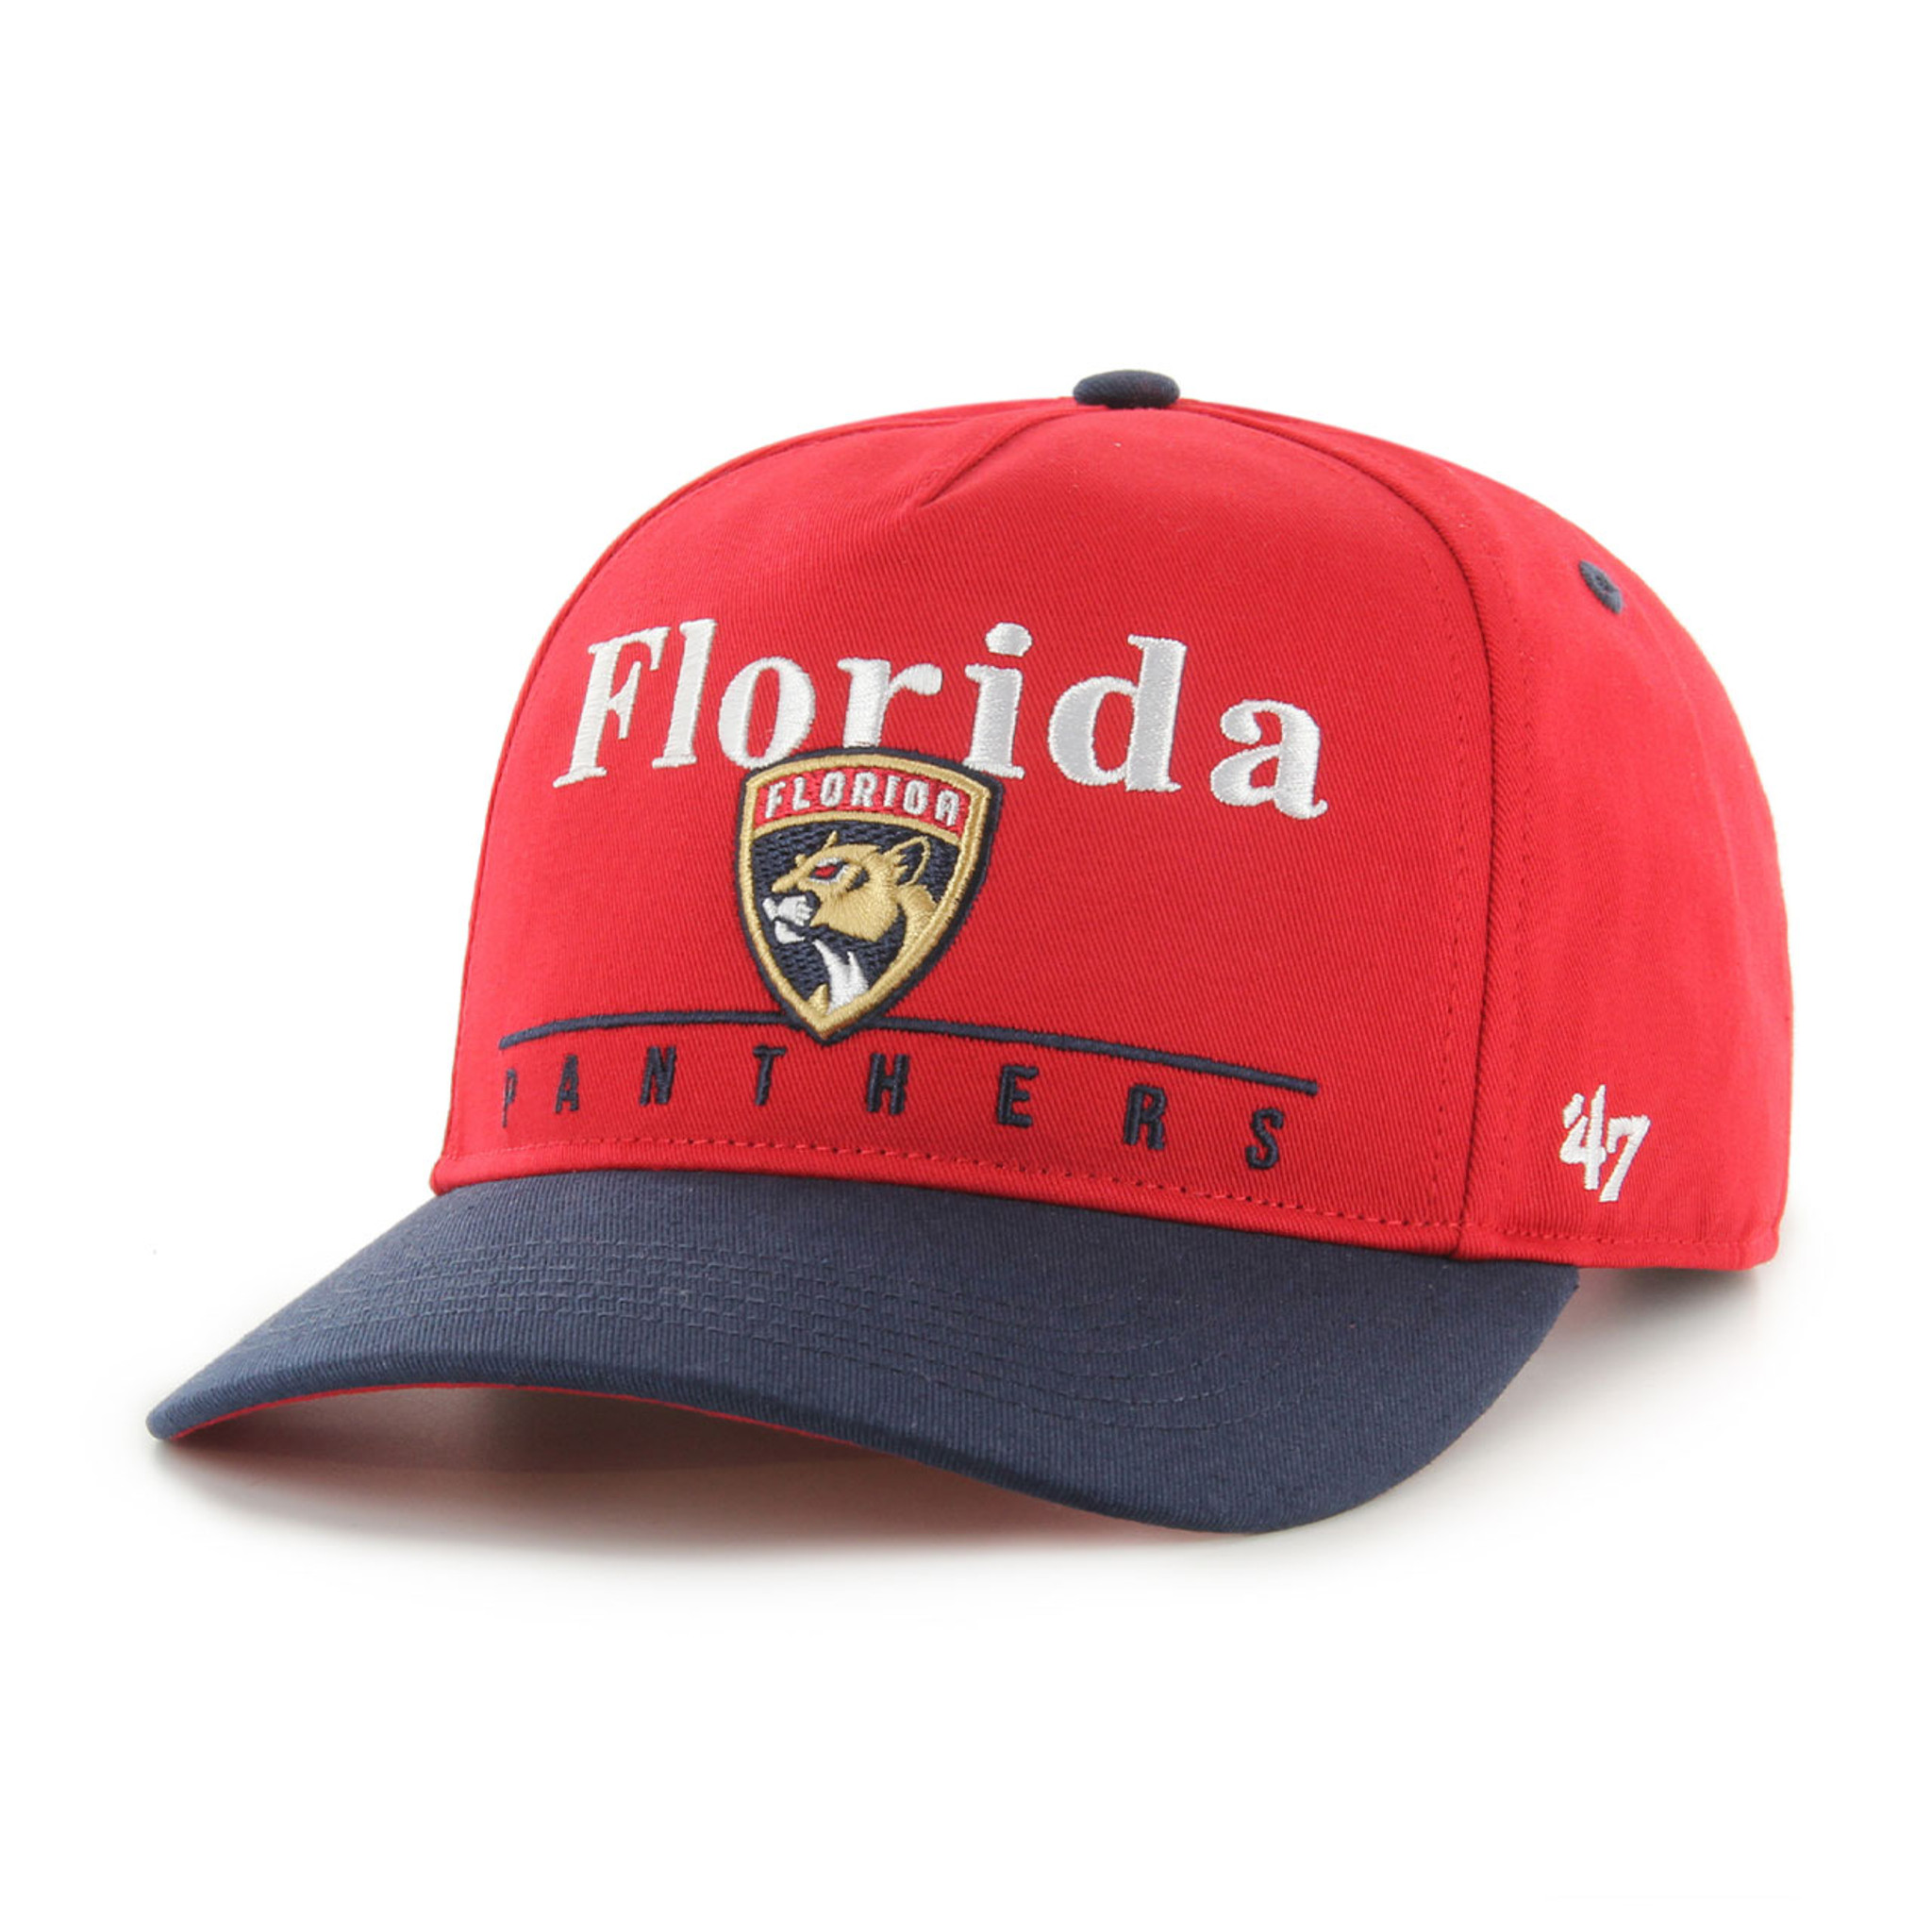 Men's Fanatics Branded Carter Verhaeghe Red Florida Panthers Home